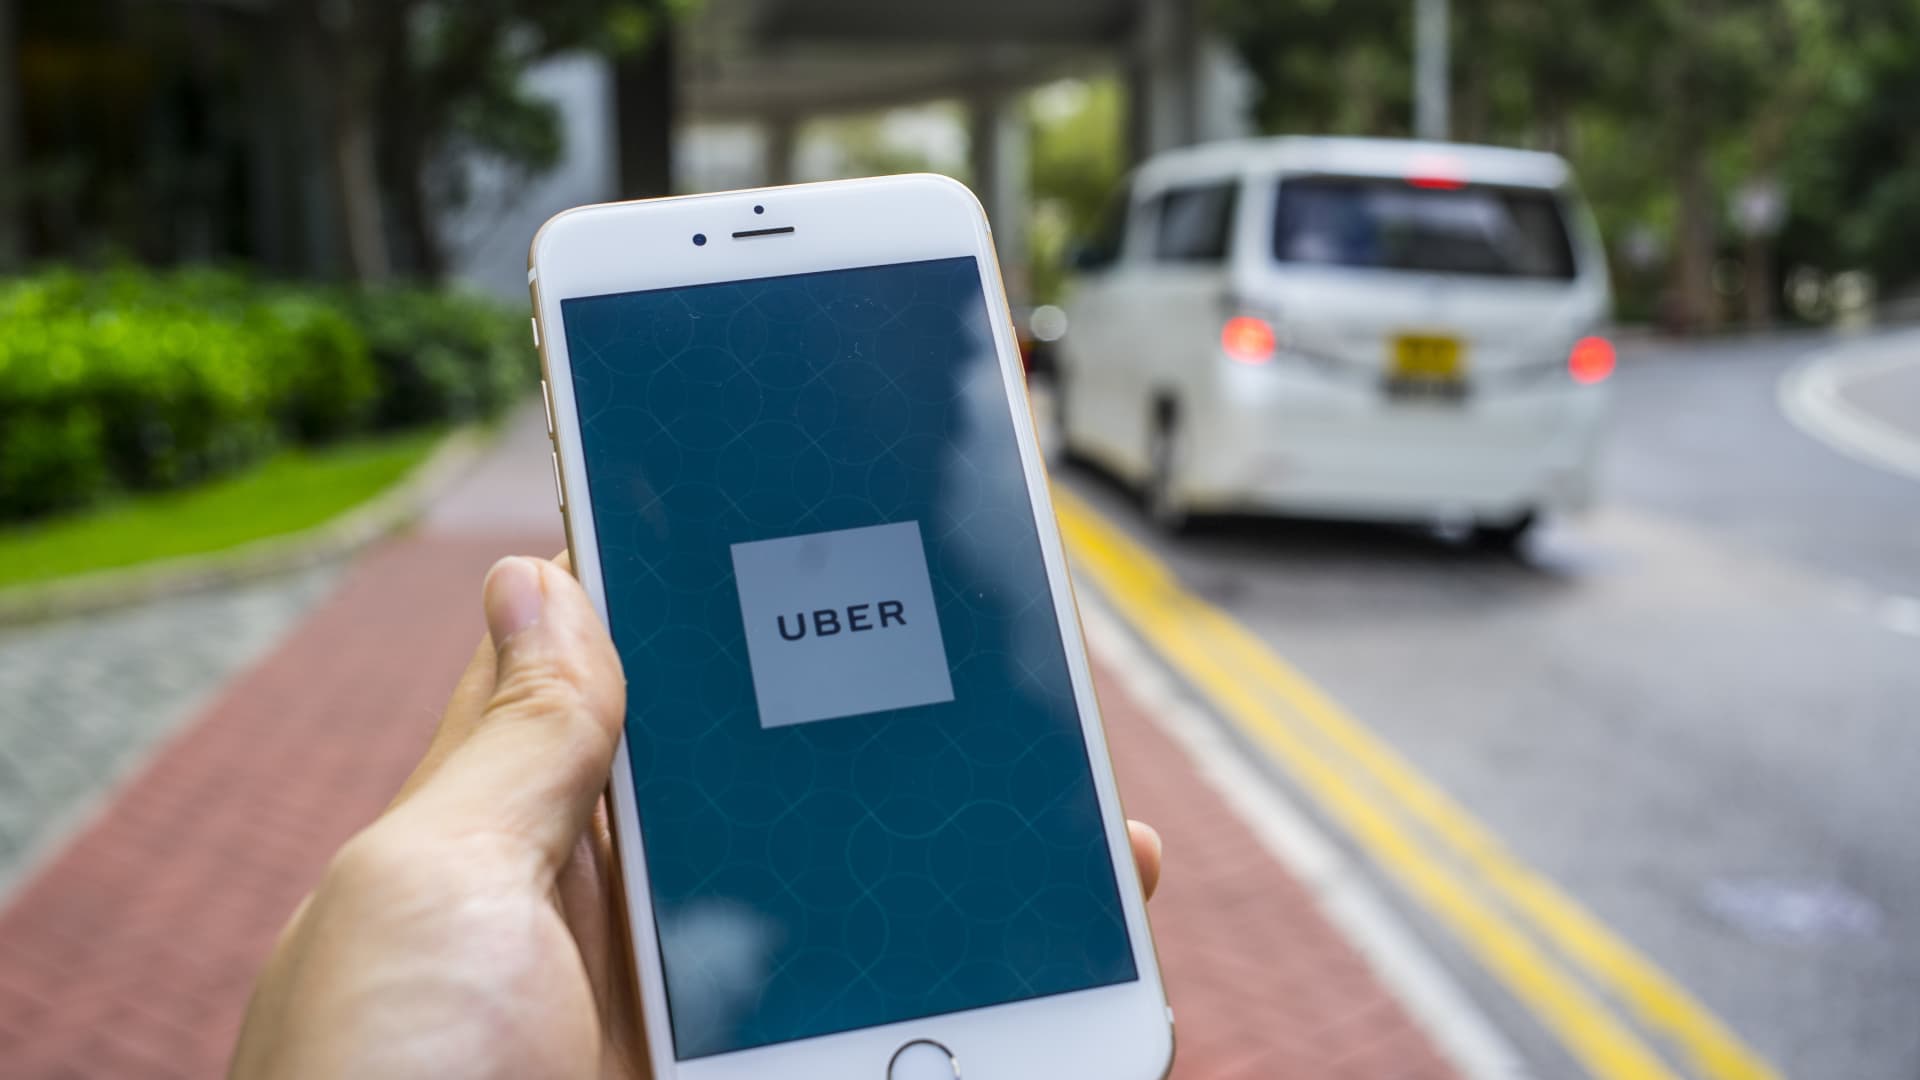 Uber faces suit from women alleging sexual assault by drivers